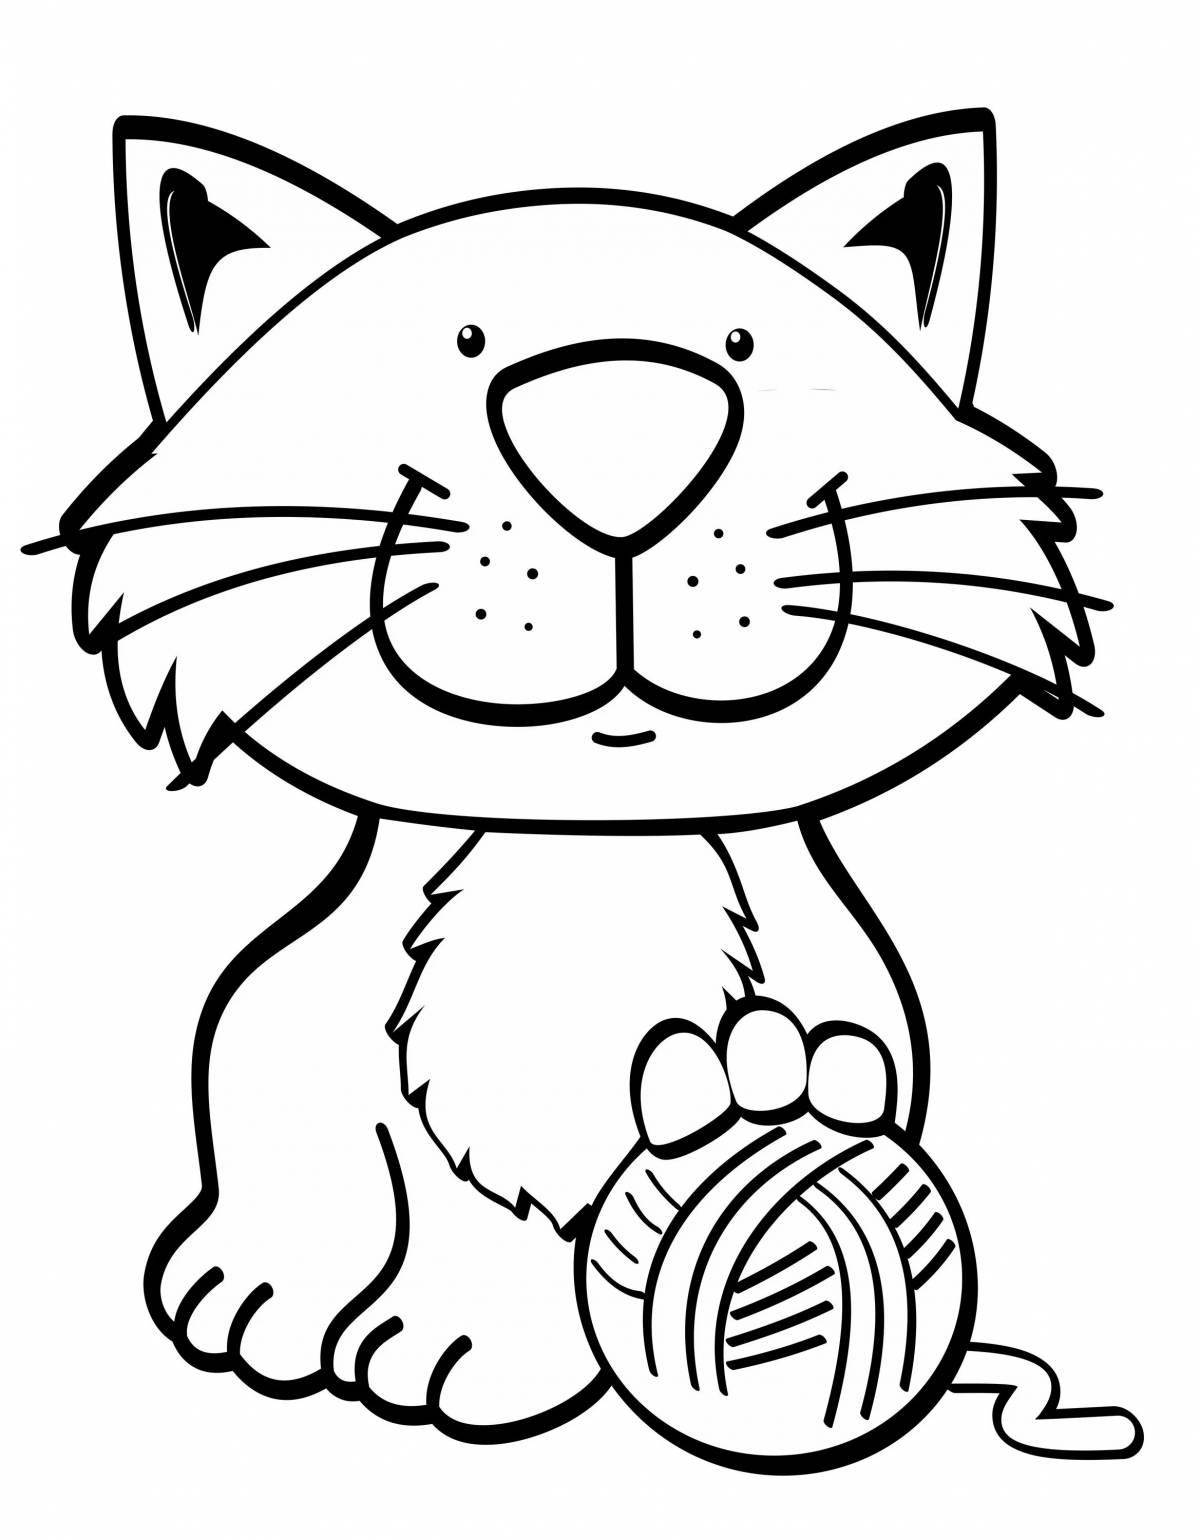 Glitter cat toy coloring book